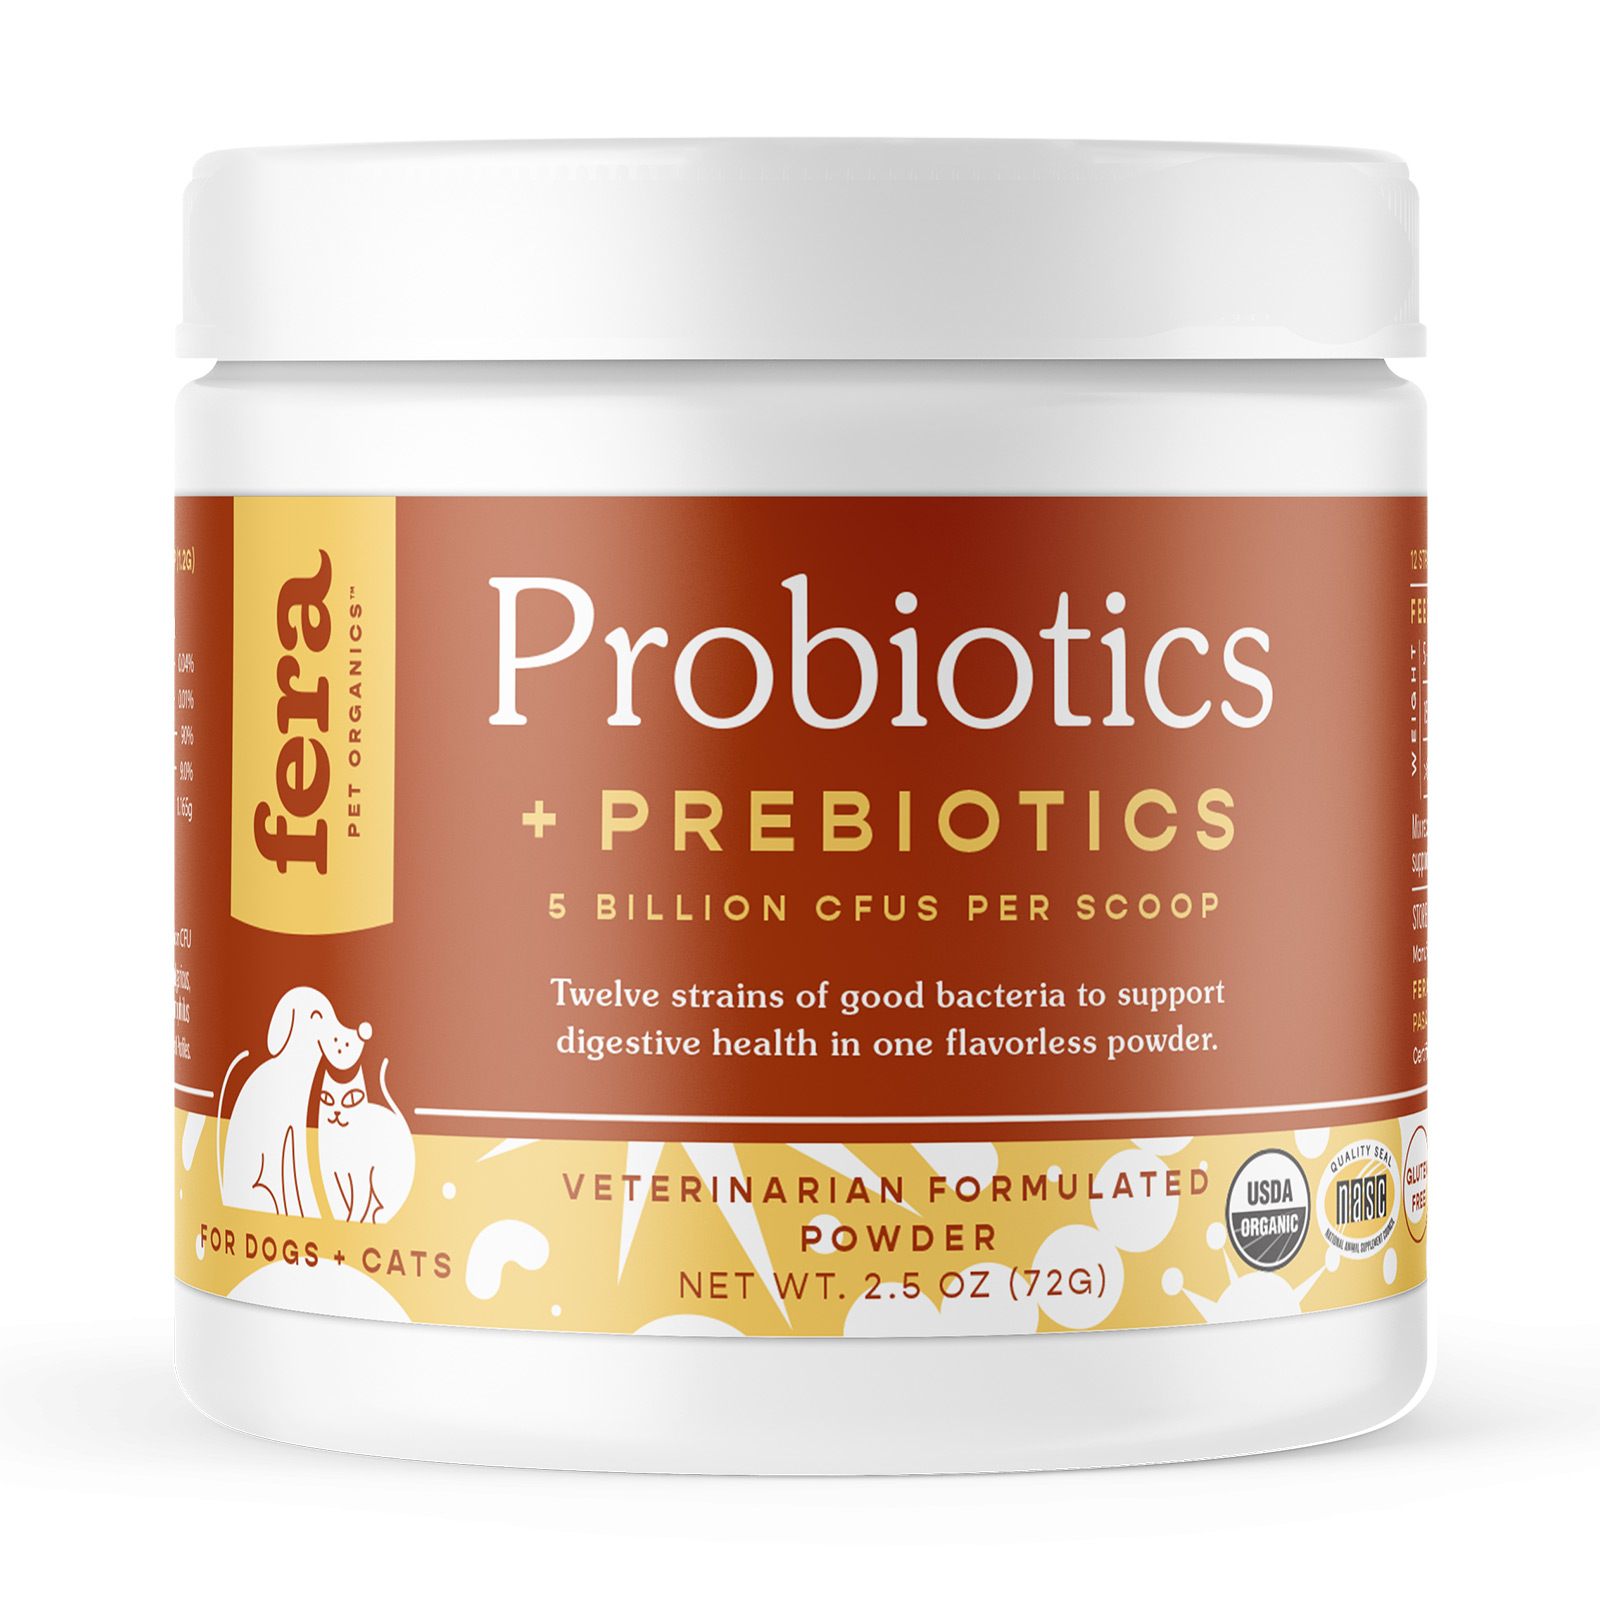 Fera Pet Organics Organic Probiotics with Prebiotics for Dogs & Cats Veterinarian Formulated Soft Chews Supplements for Dogs